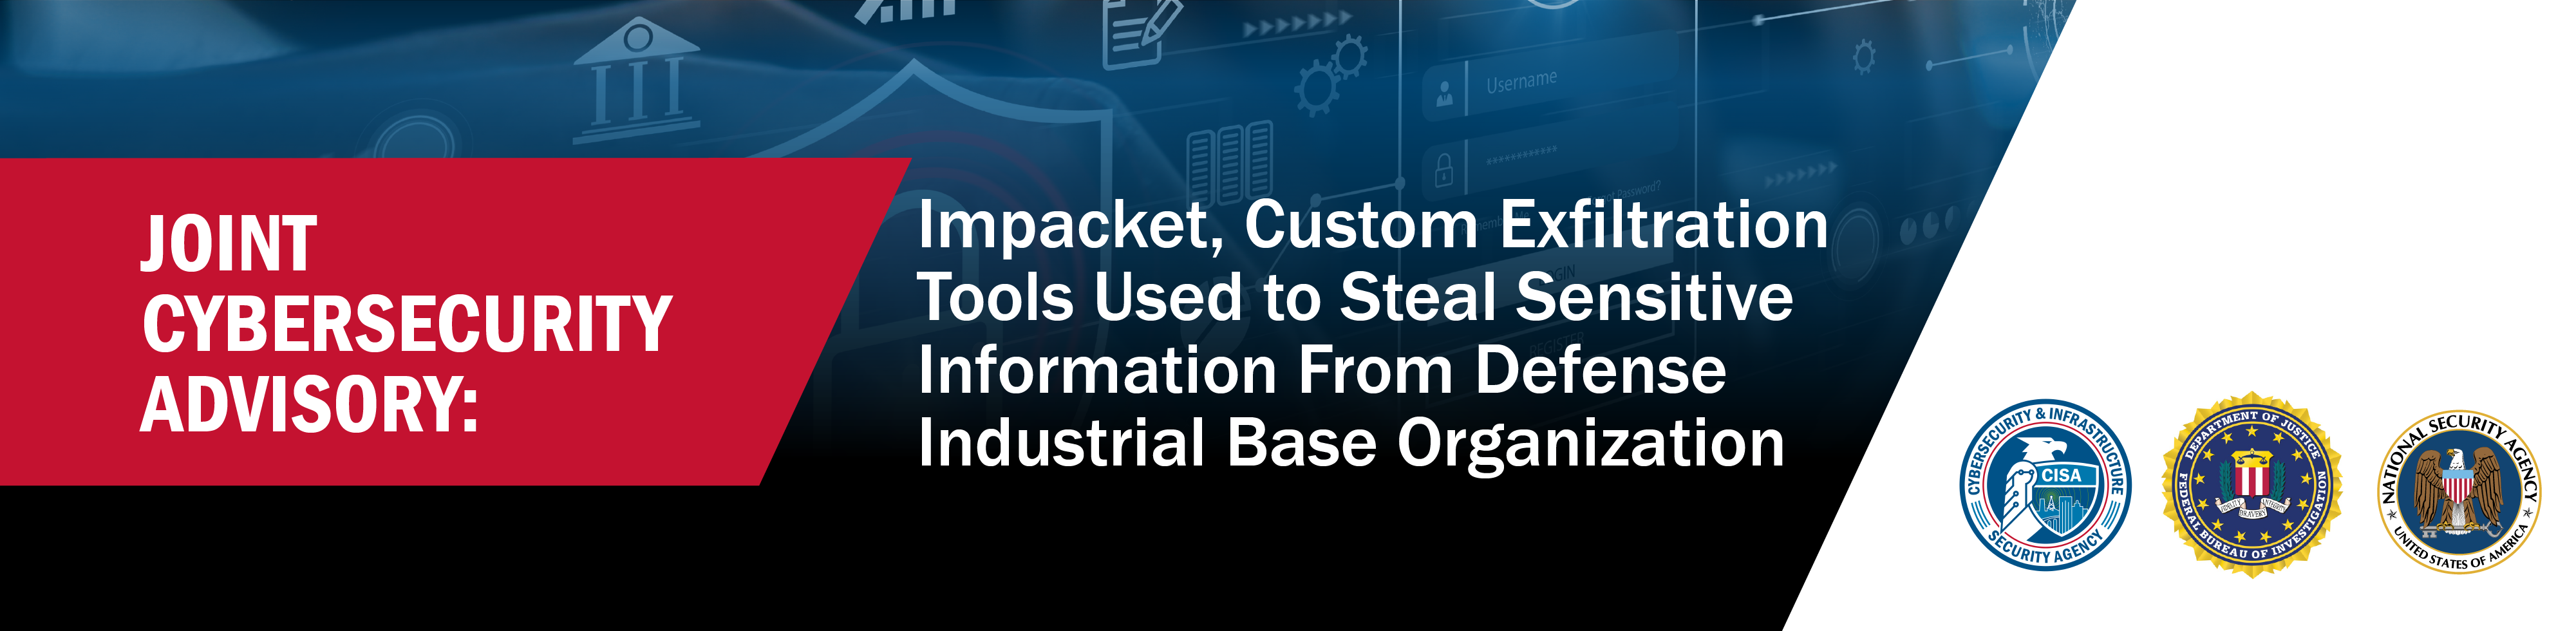 mpacket and Exfiltration Tool Used to Steal Sensitive Information from Defense Industrial Base Organization